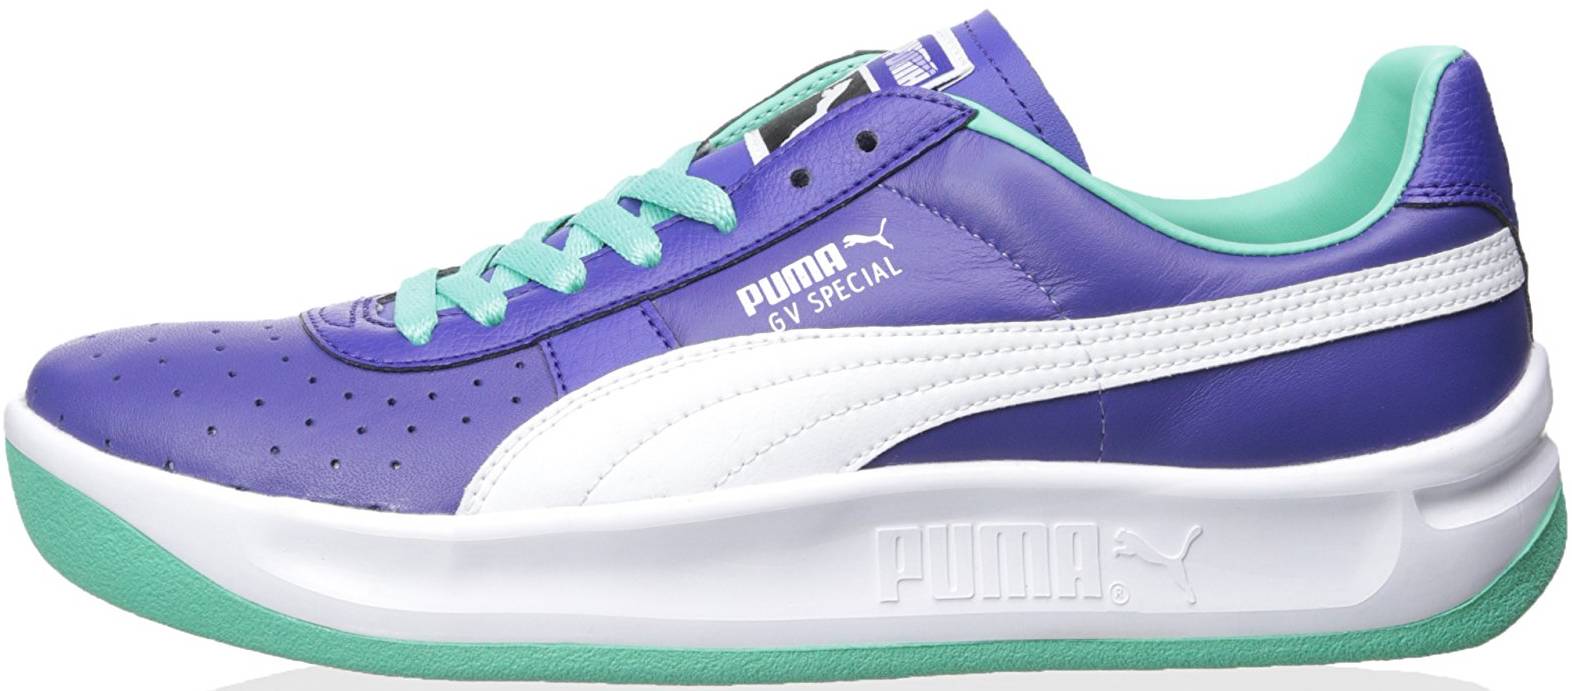 Only $50 + Review of Puma GV Special 